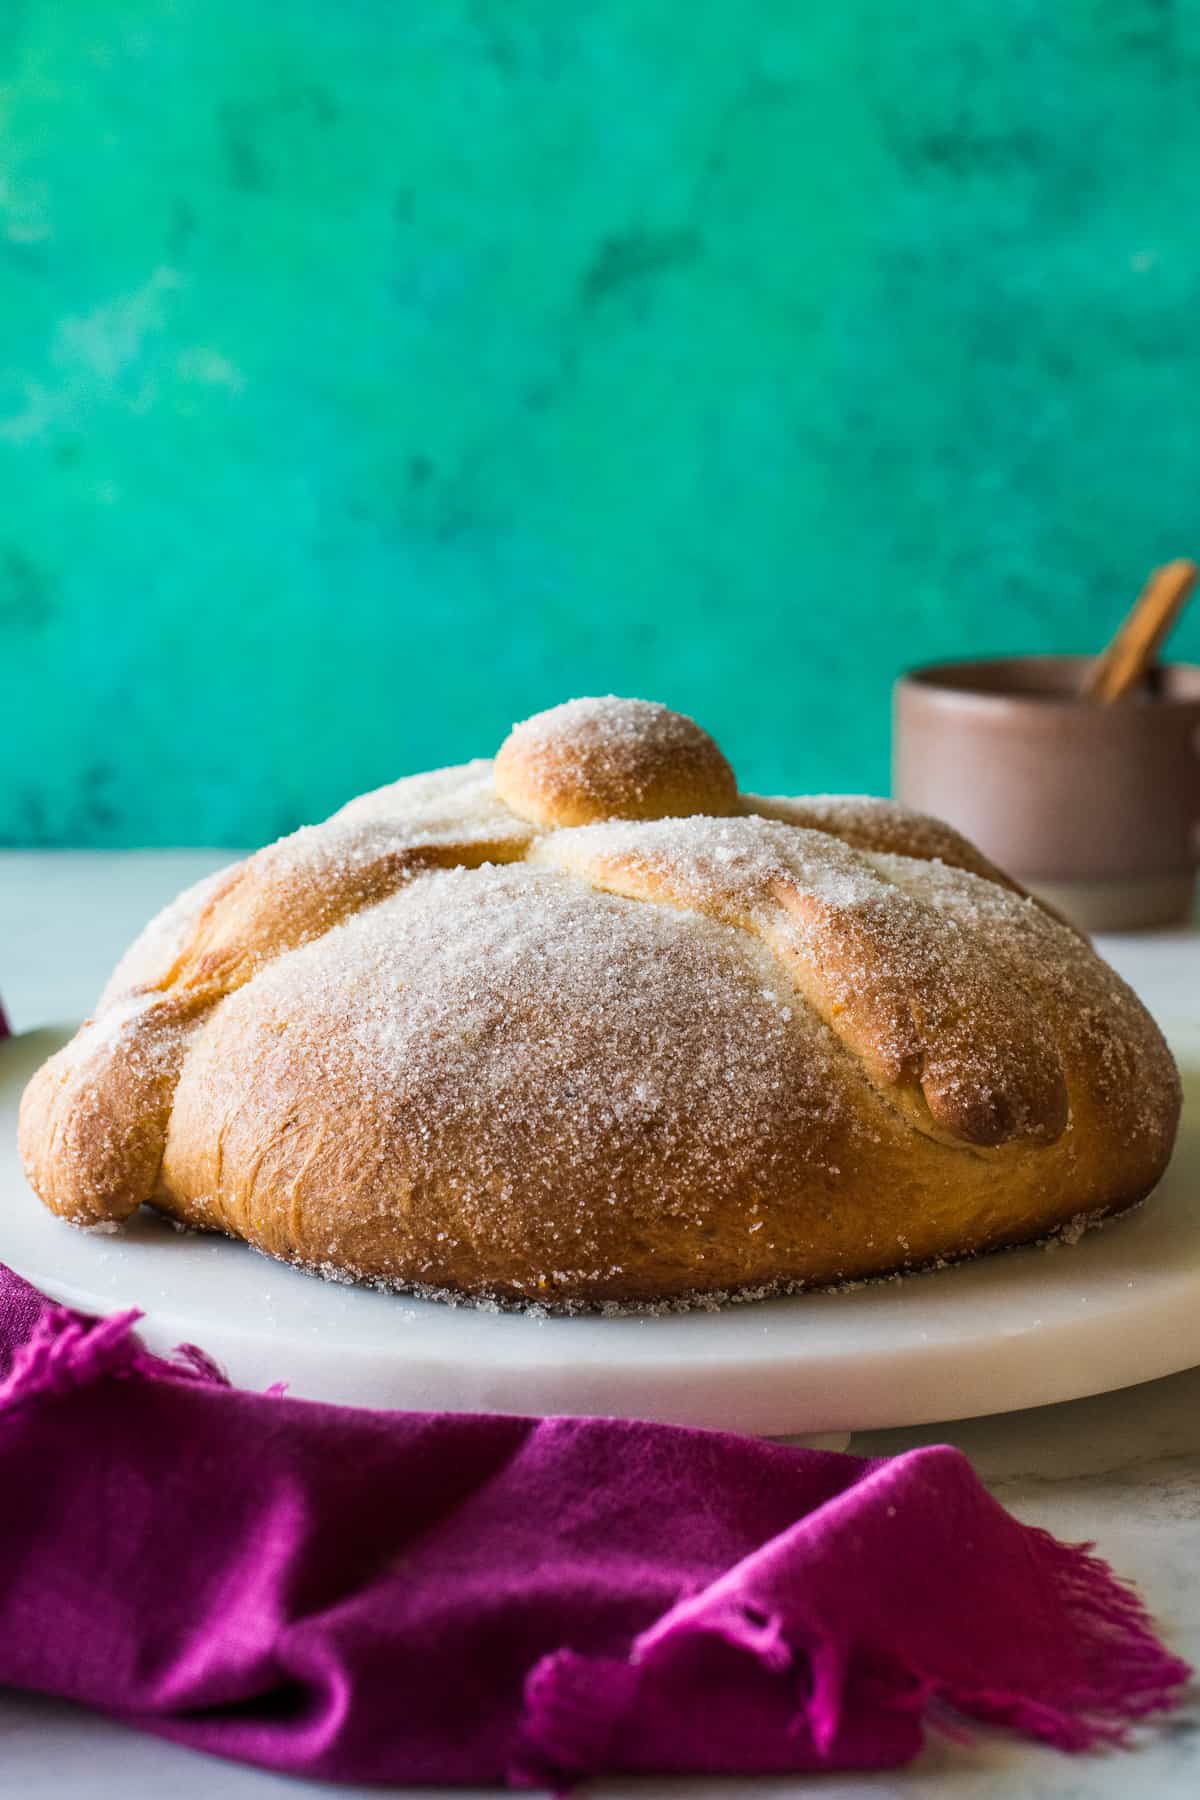 Pan de Muerto (or Day of the Dead bread) covered in sugar and ready to eat.